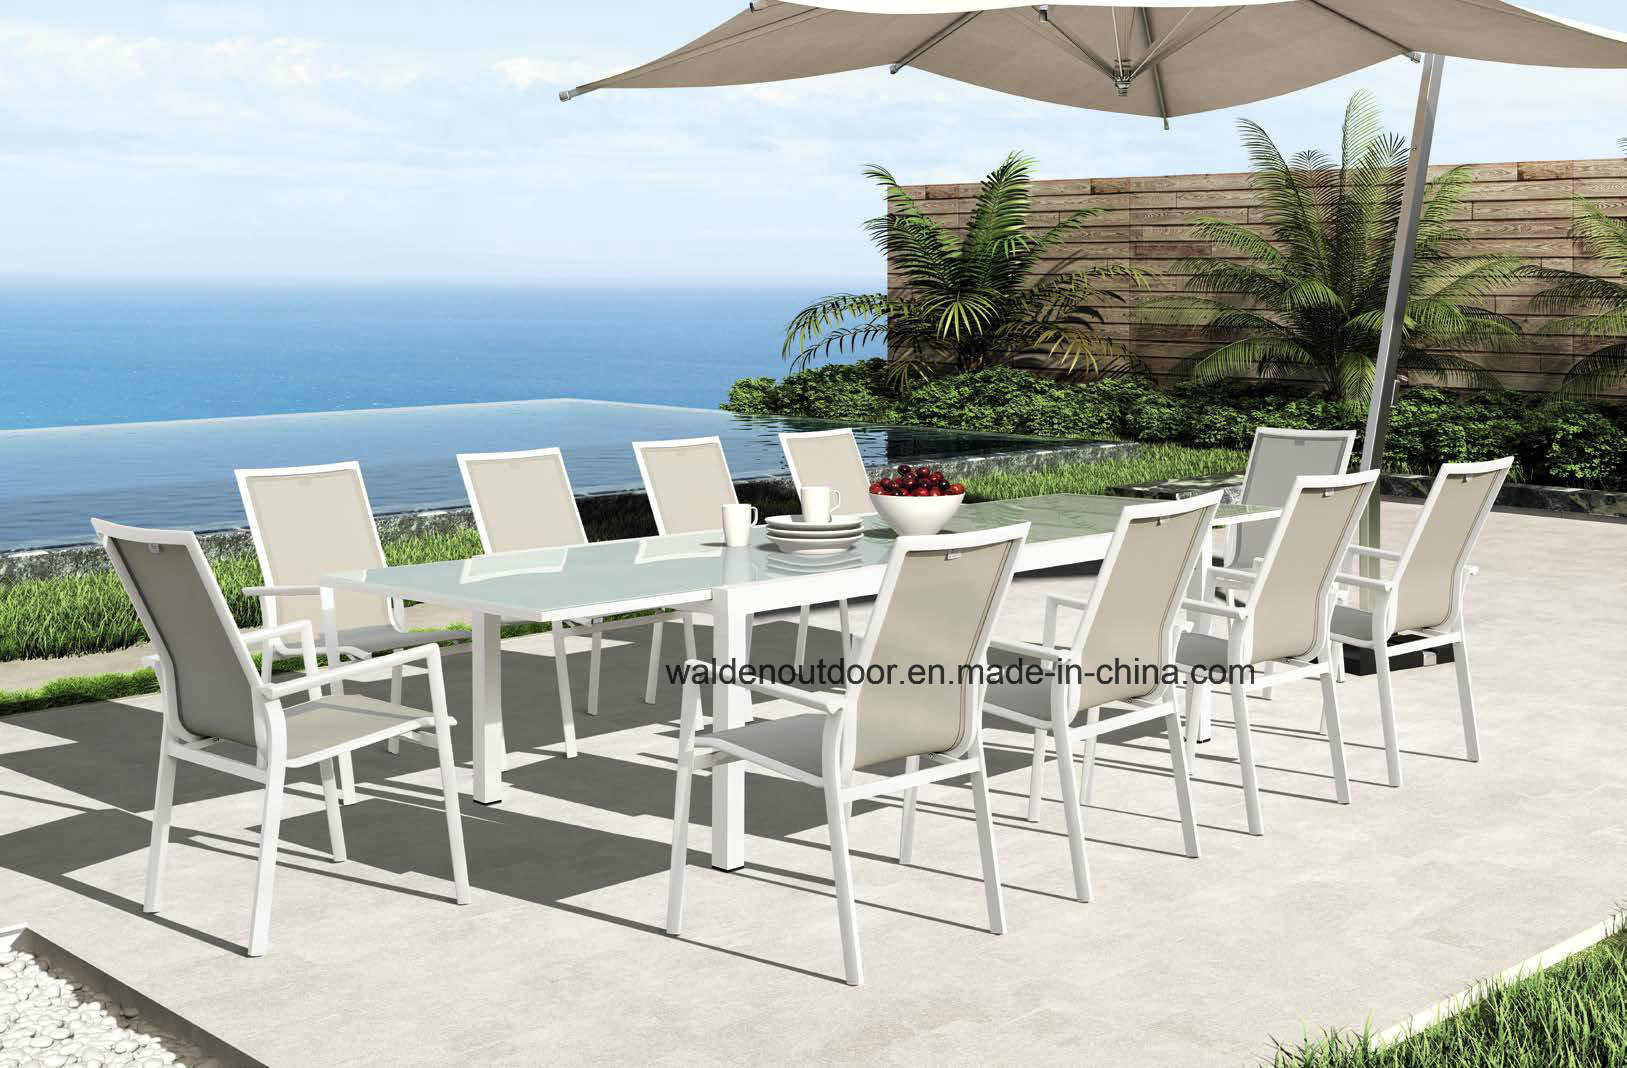 Outdoor Furniture, Patio Furniture, Garden Furniture, Garden Table and Chairs (DH-862CS6)